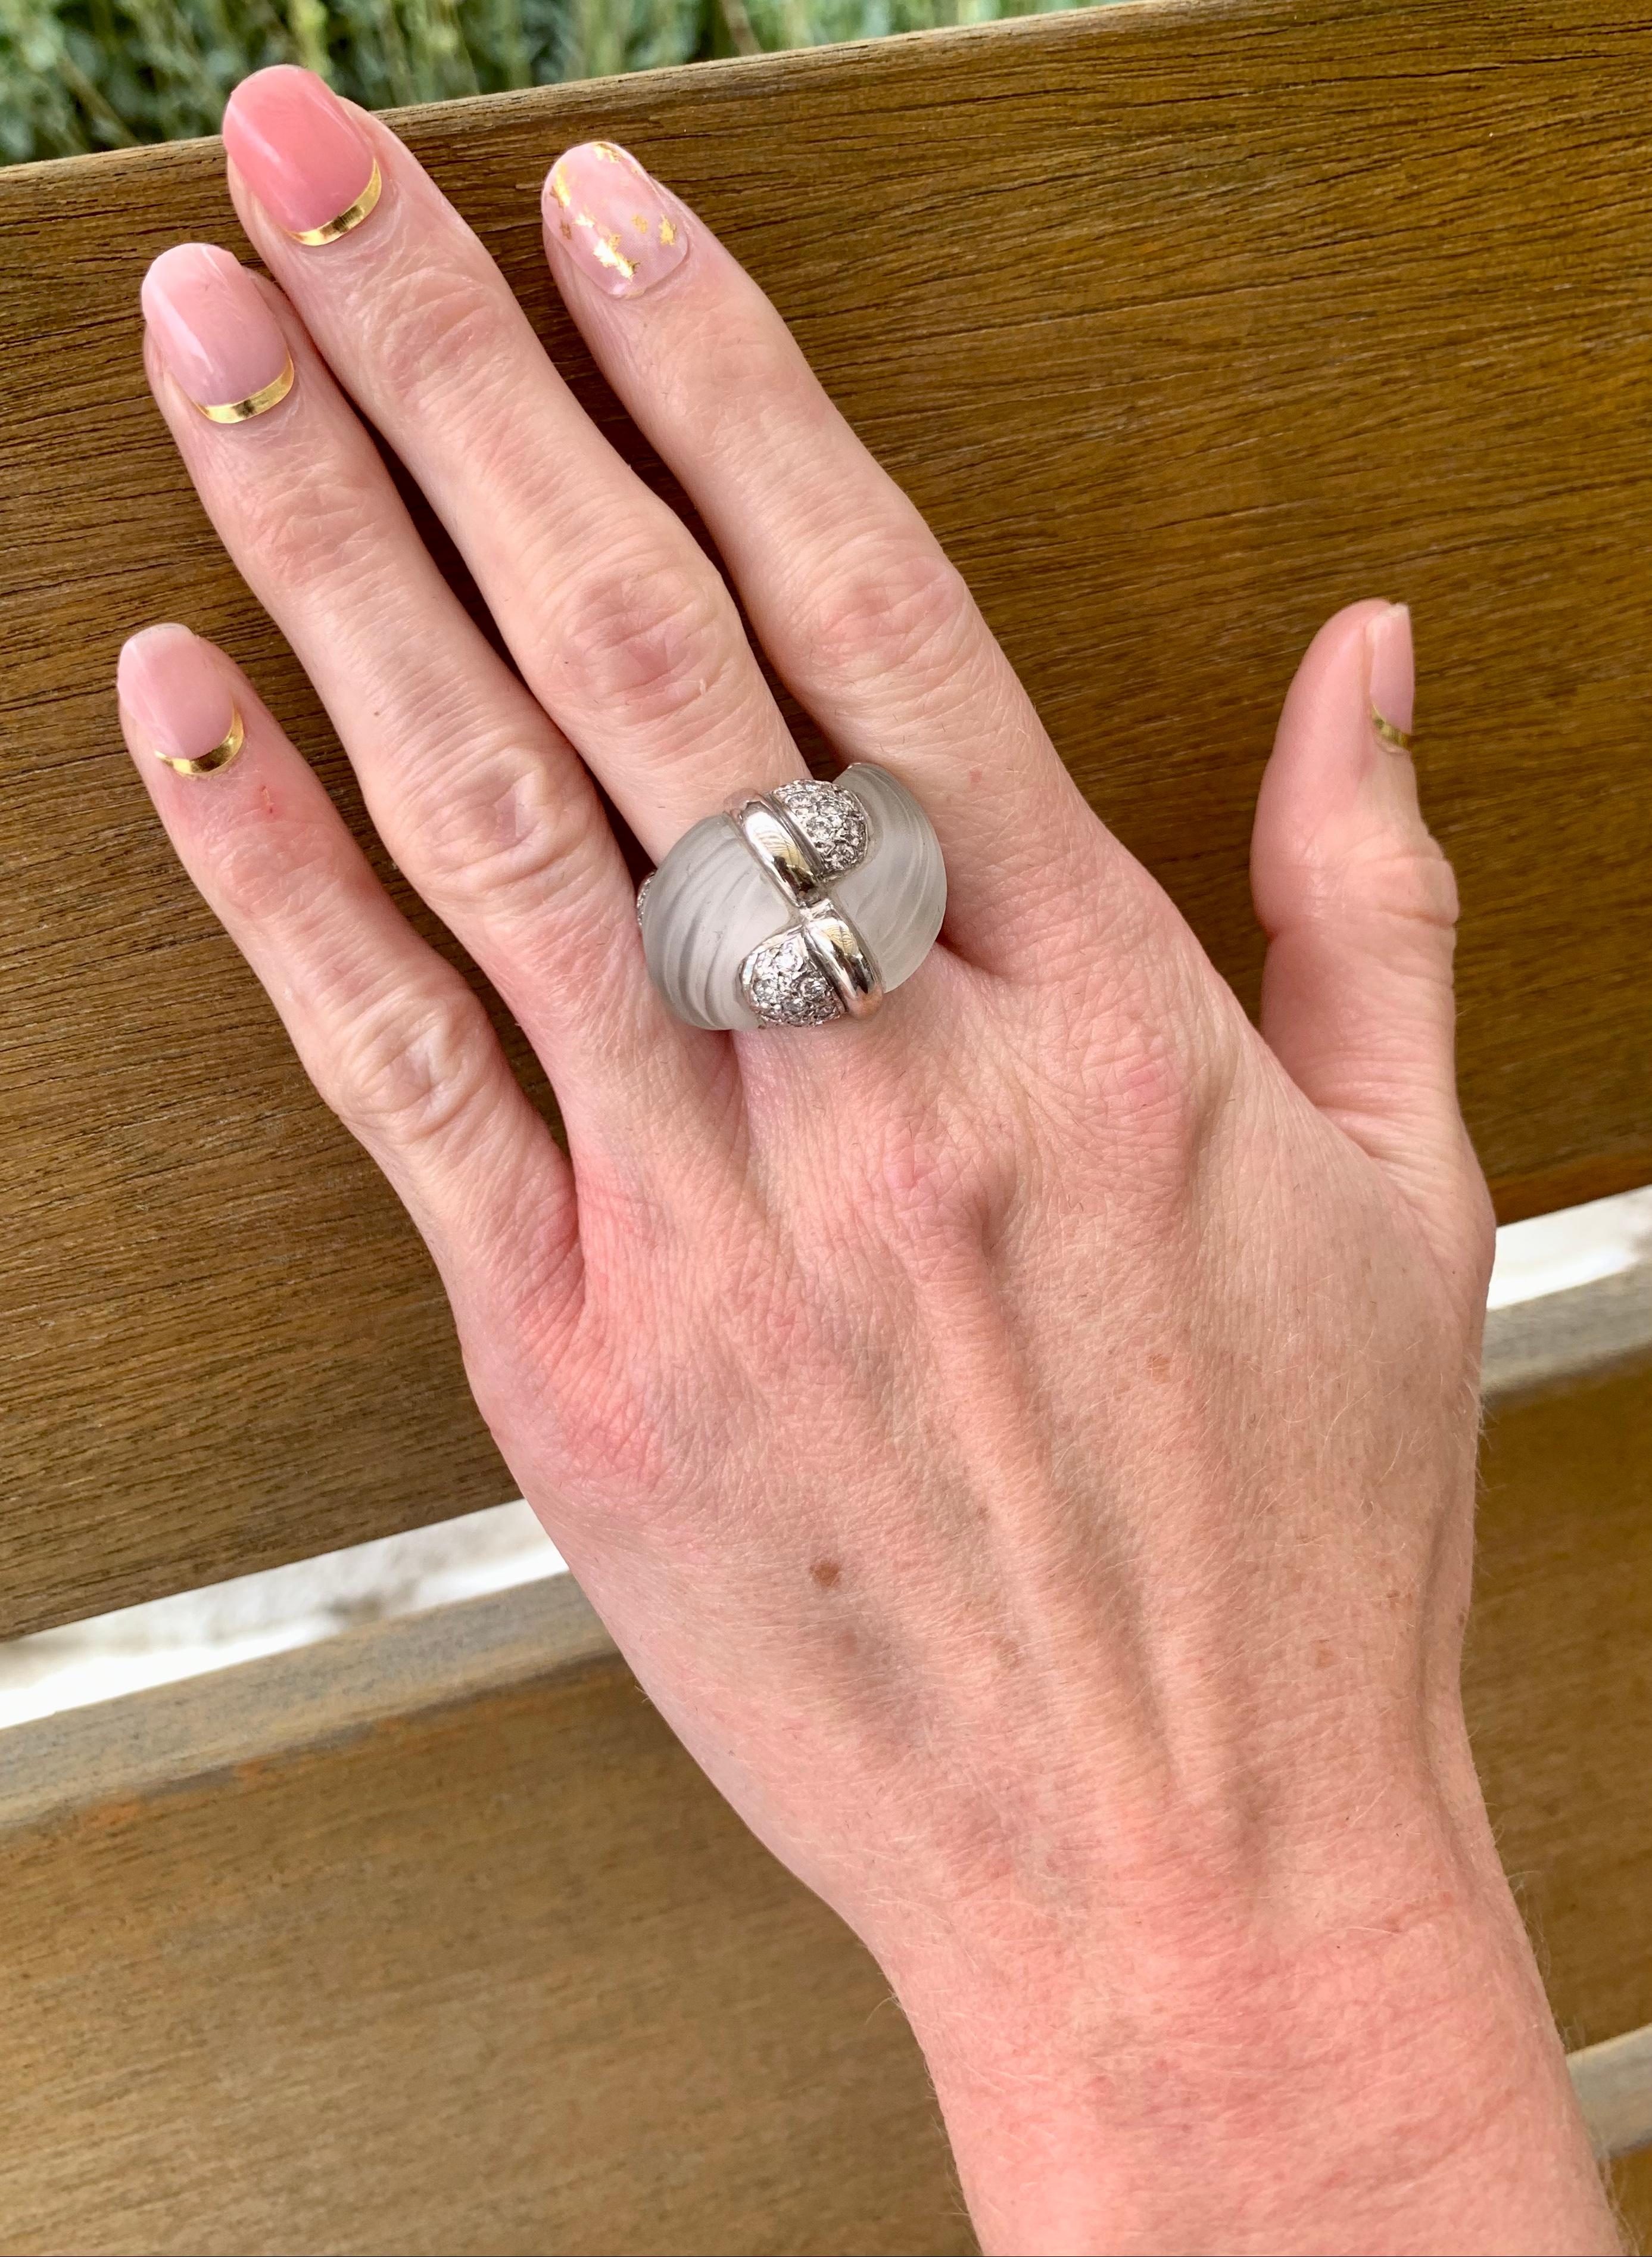 Women's Fluted Rock Crystal Quartz and Diamond 18k White Gold Cocktail Ring, circa 1970s For Sale